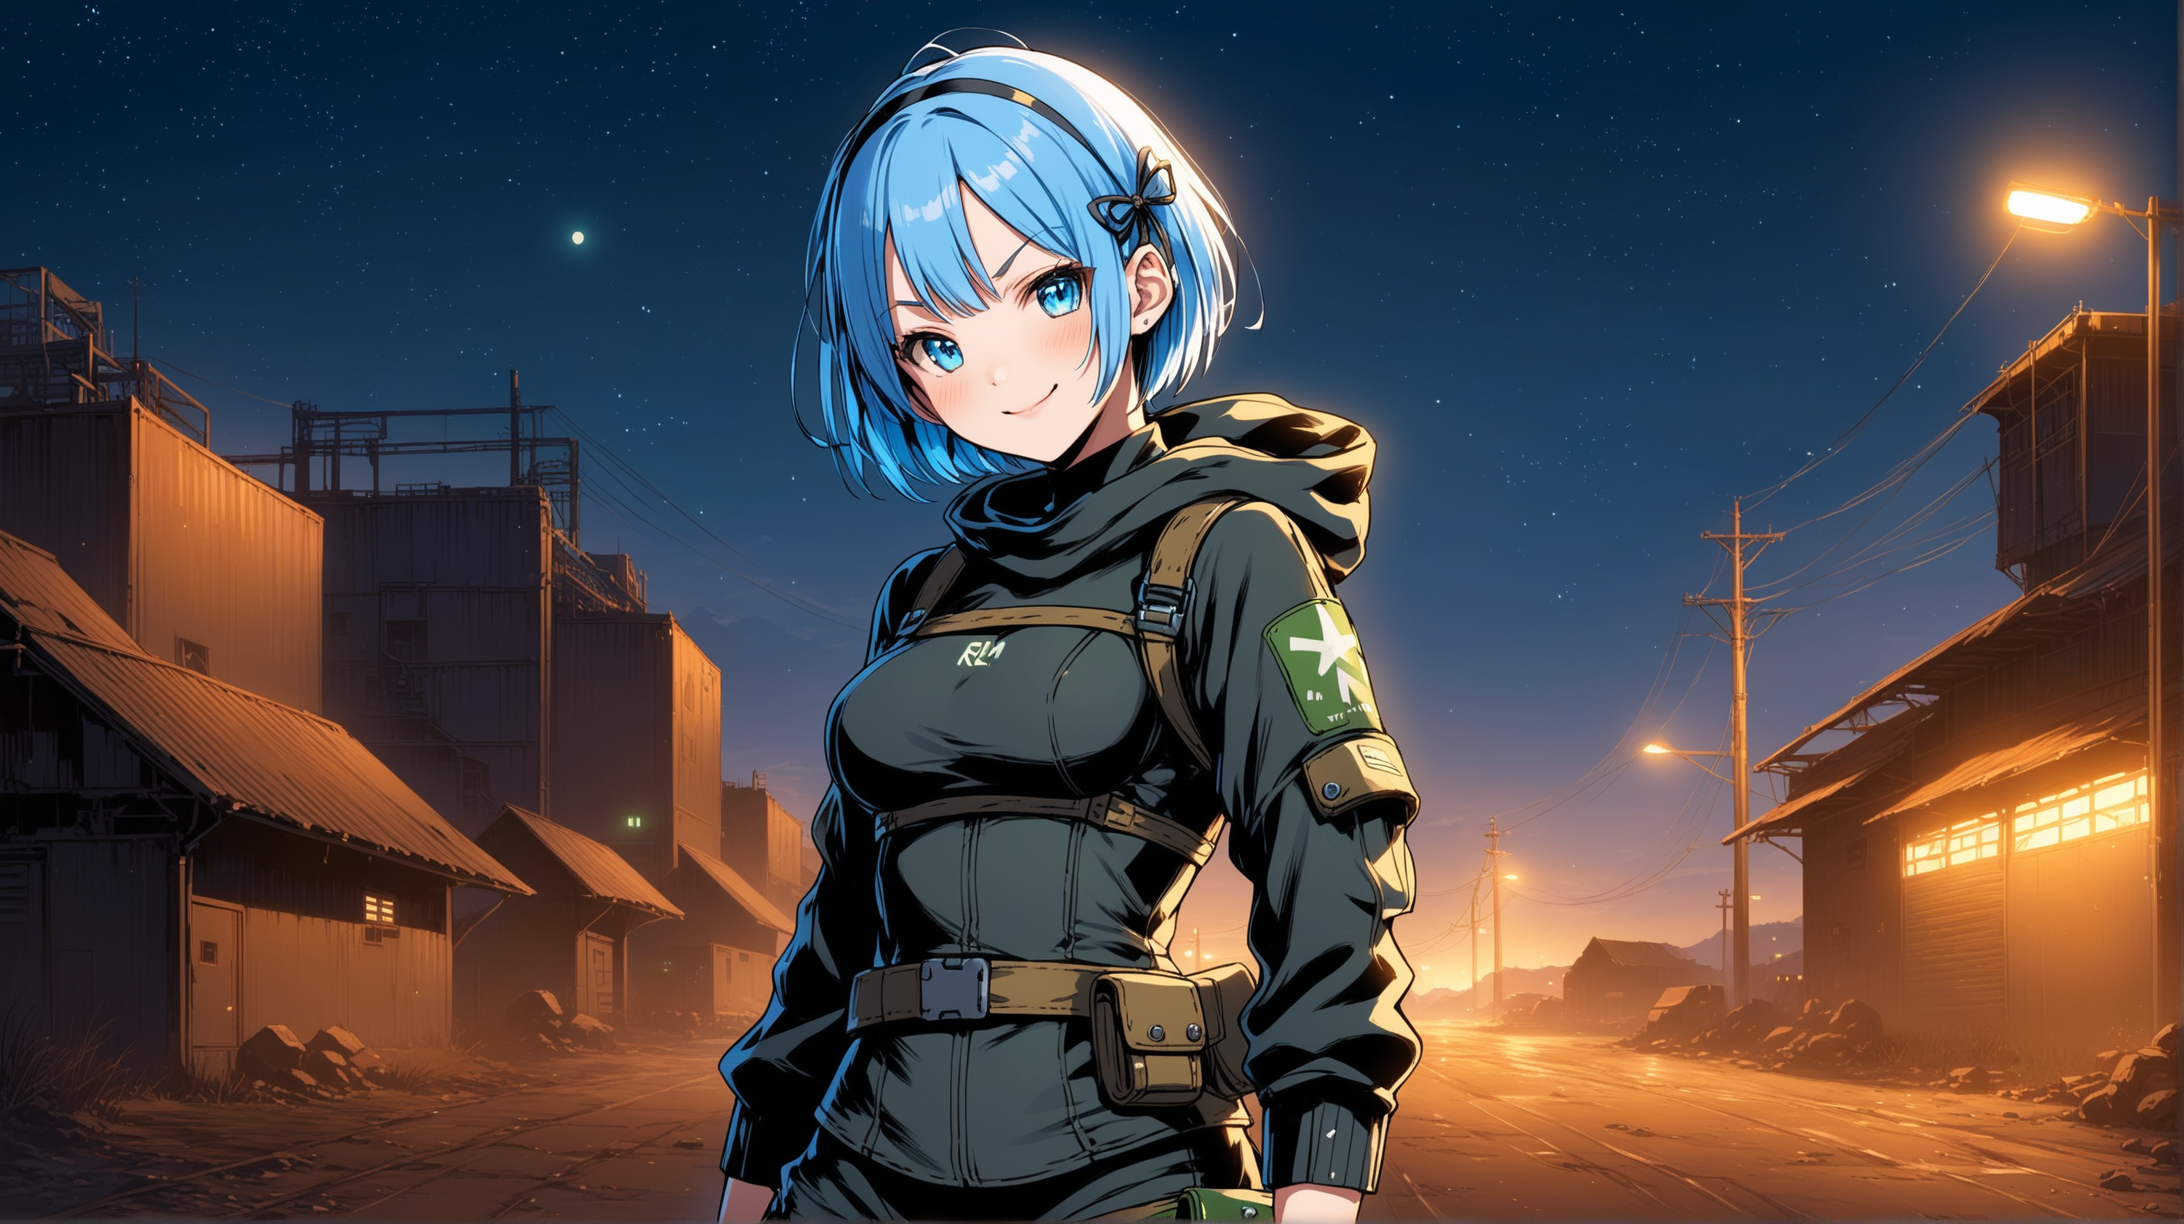 Draw the character Rem, high quality, in a nonchalant pose, outdoors, at night, wearing an outfit inspired from the Fallout series, smiling at the viewer